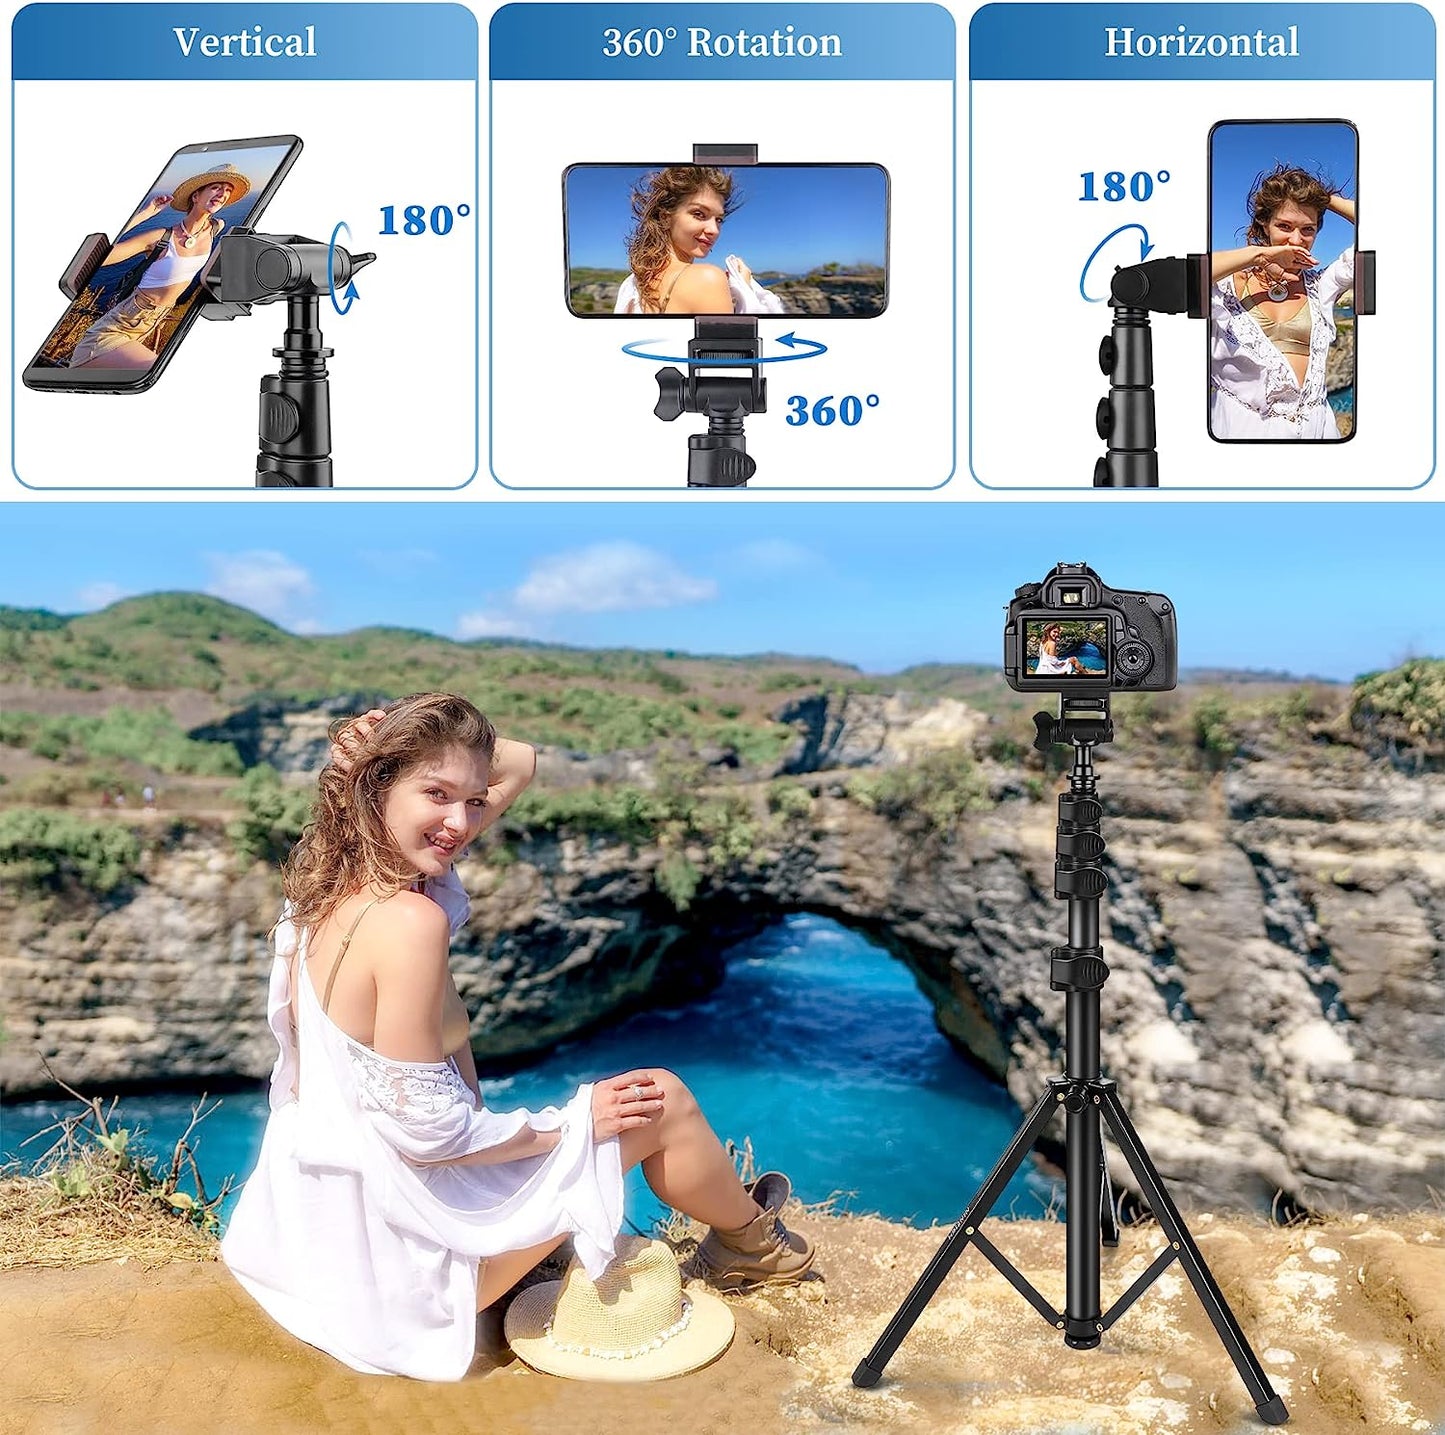 Phone Tripod Selfie Stick Tripods, 70" Cell Phone Tripod Stand with Remote/Phone Holder/Carry Bag, Aluminum Alloy Selfie Stick Tripod, Compatible with iPhone/Samsung/GoPro/Smartphone(USA)